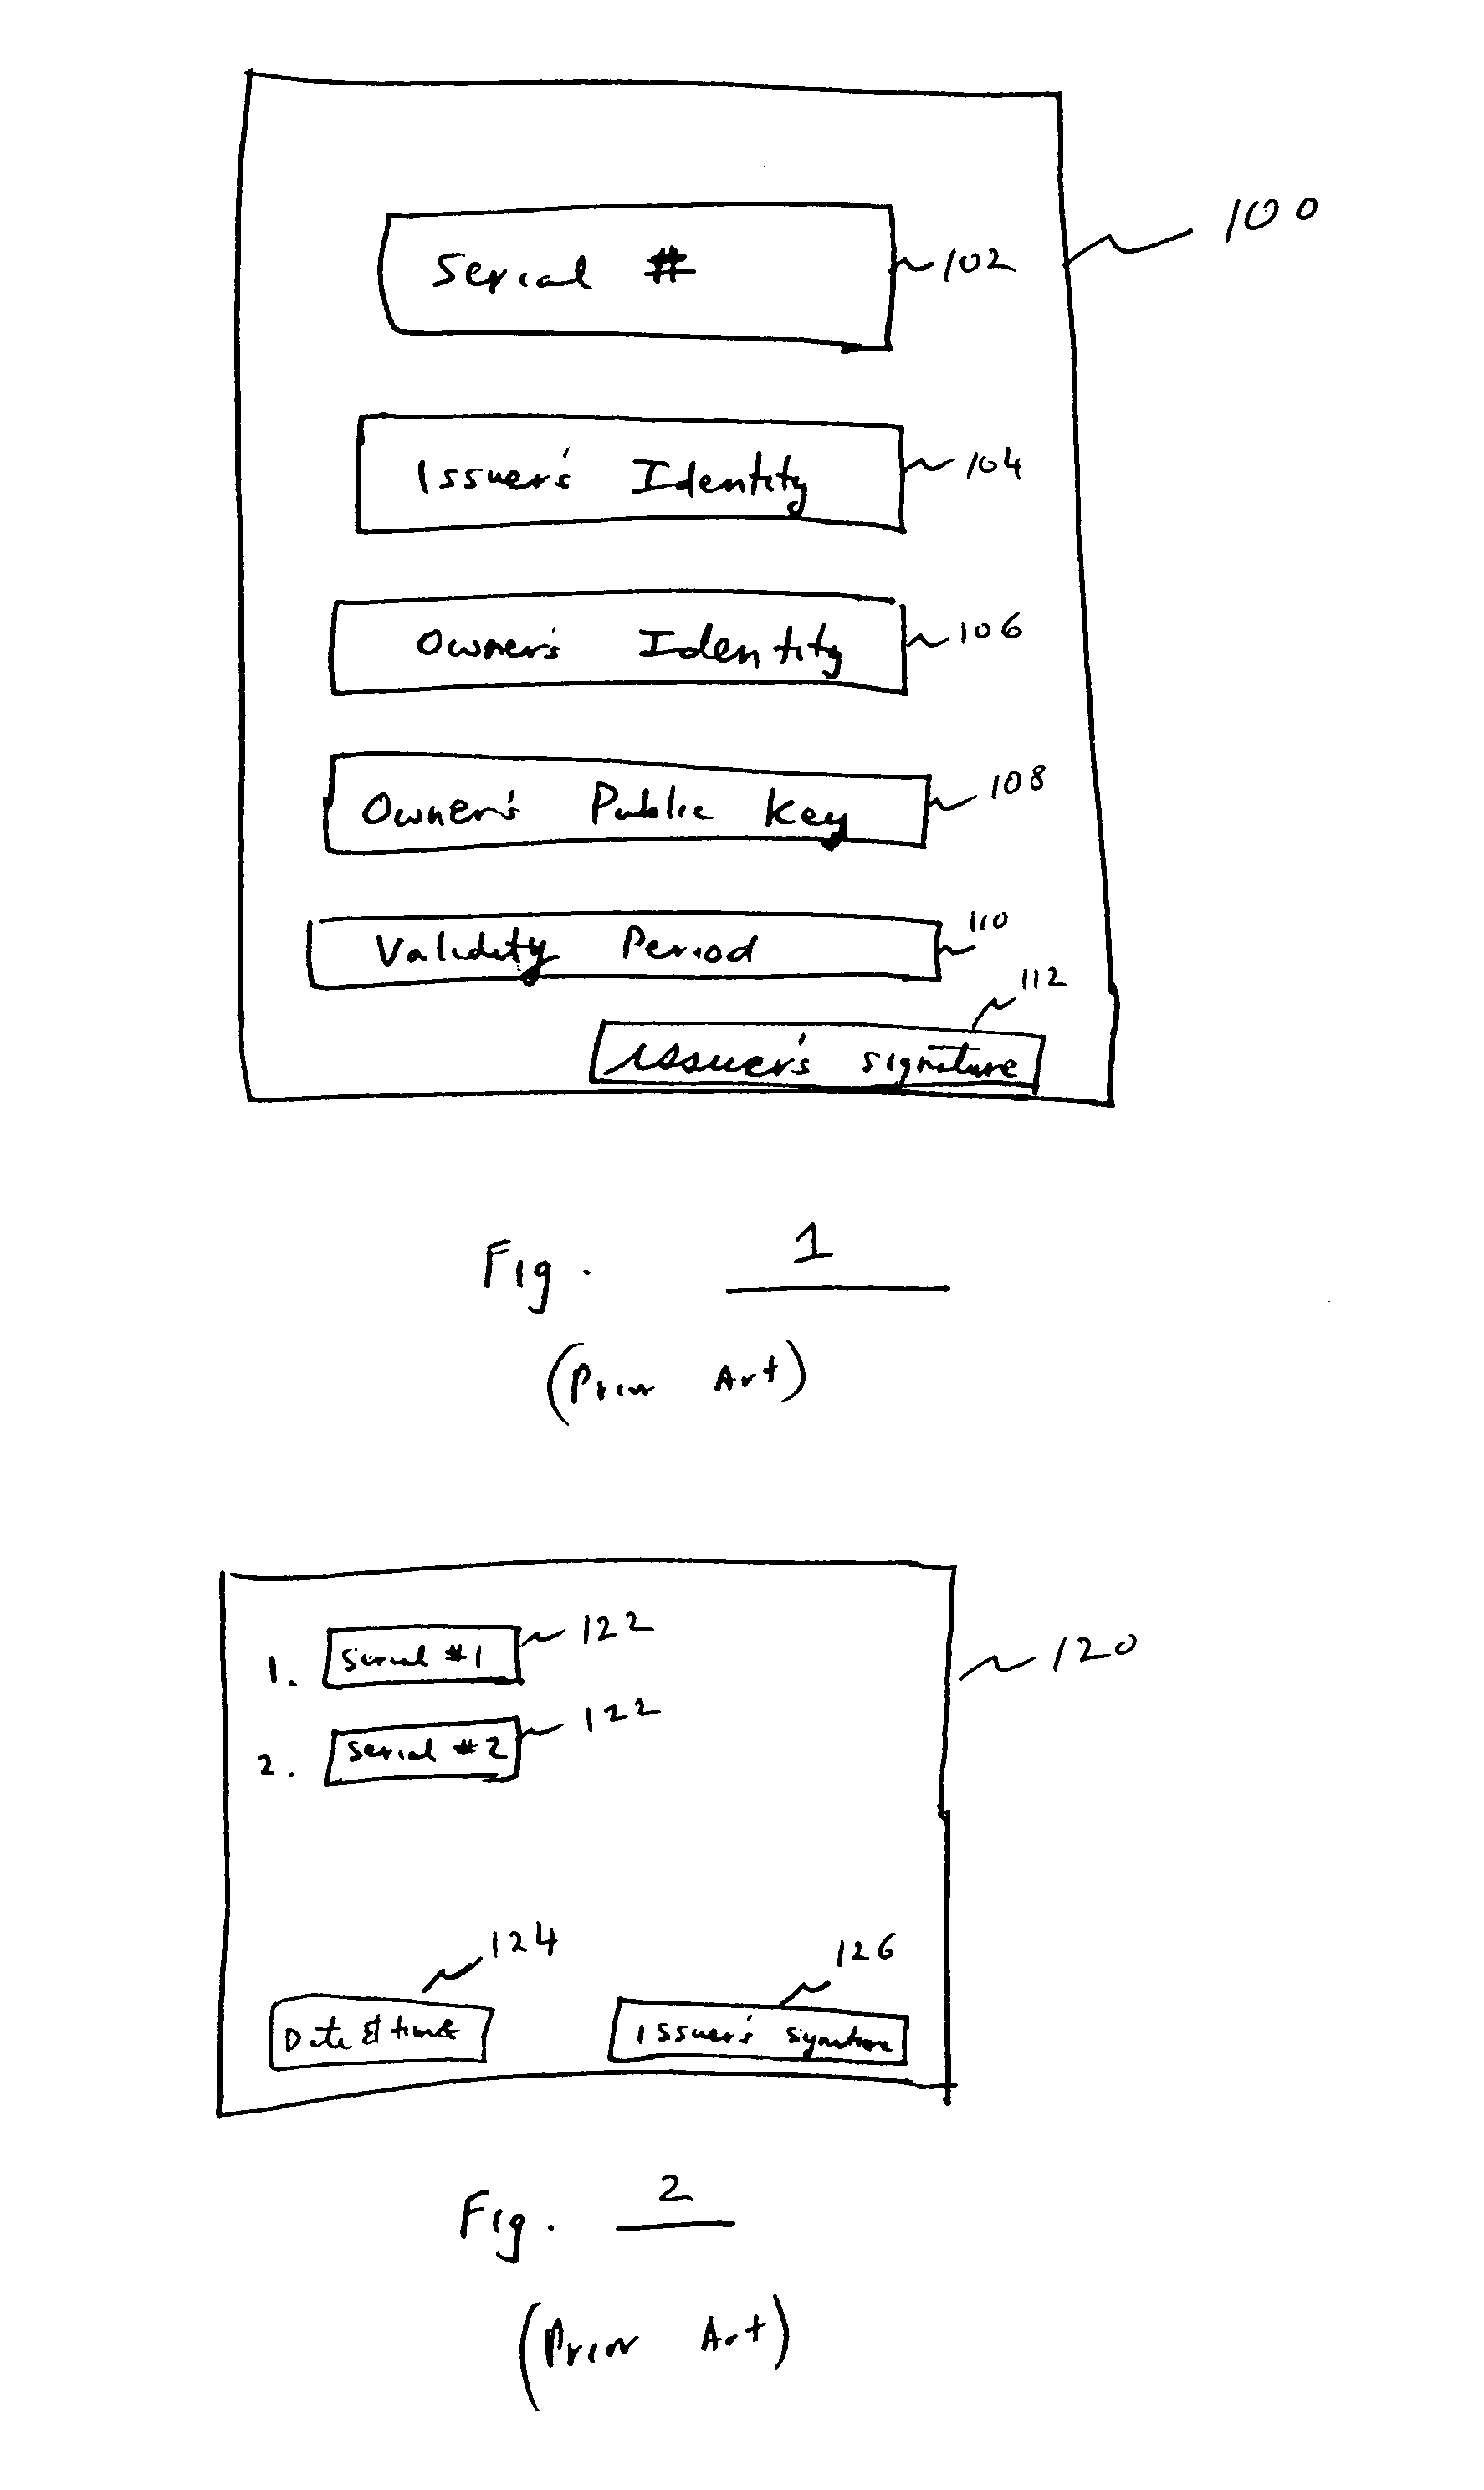 Method and apparatus for self-authenticating digital records